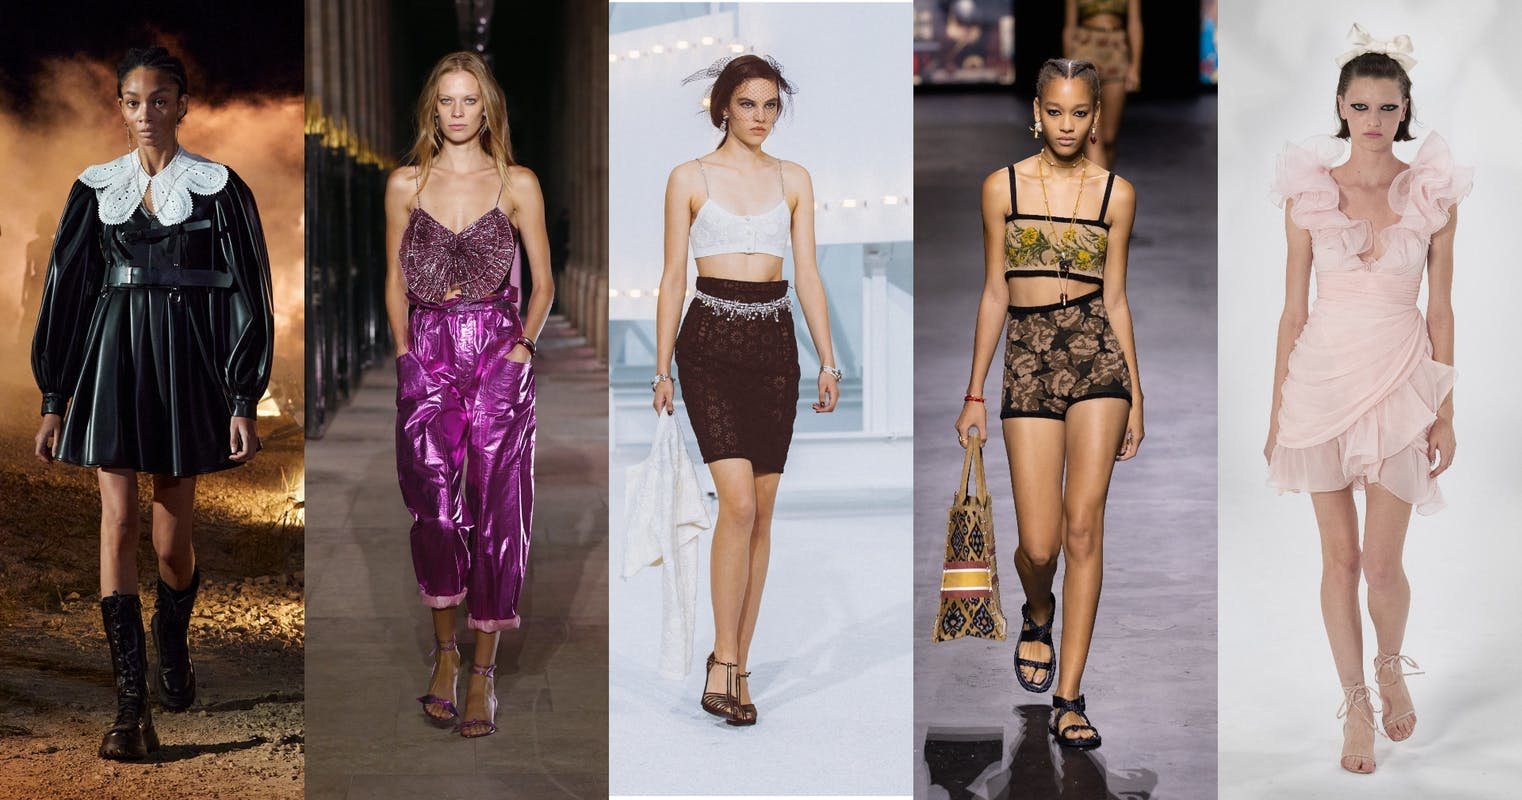 The 8 fashion trends for spring-summer 2021